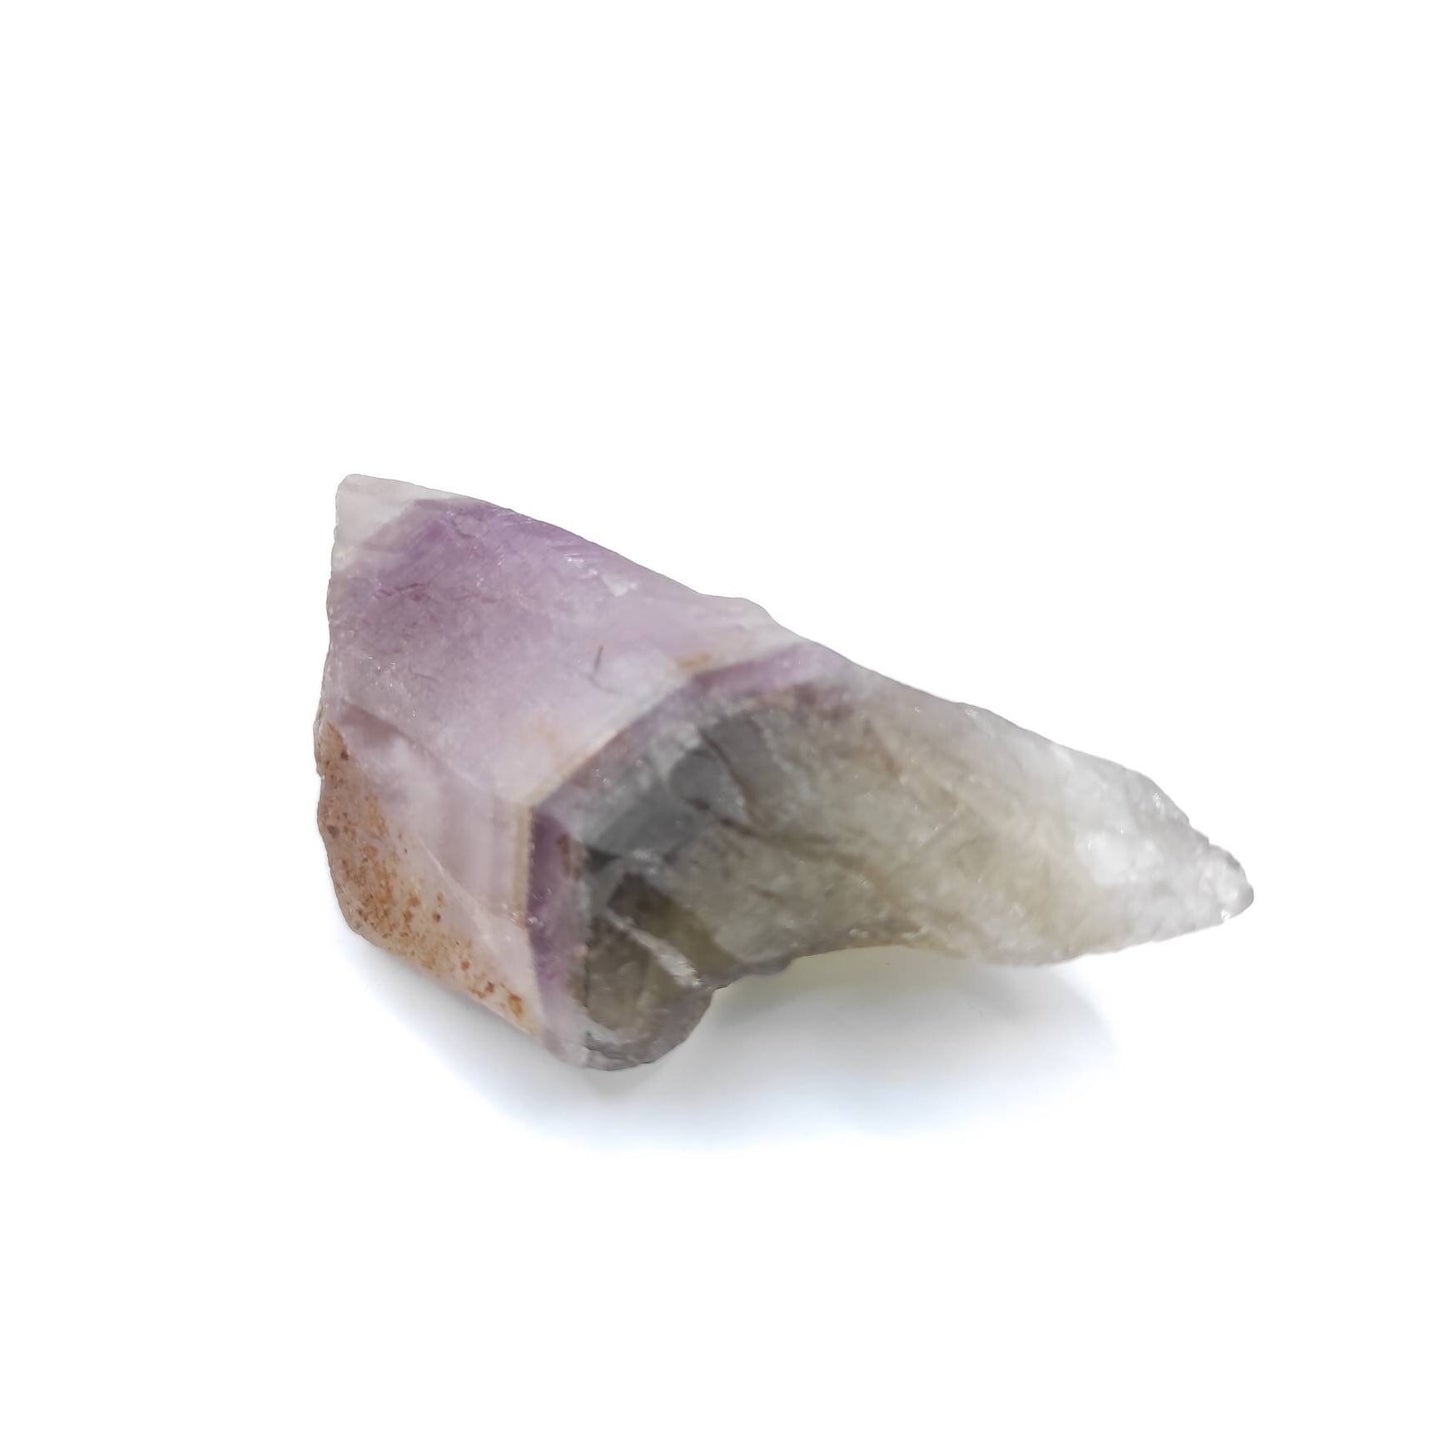 27g Genuine Auralite 23 with Natural Green Amethyst - Rare Unheated Green Amethyst - Thunder Bay Amethyst - Ethical Crystals from Canada